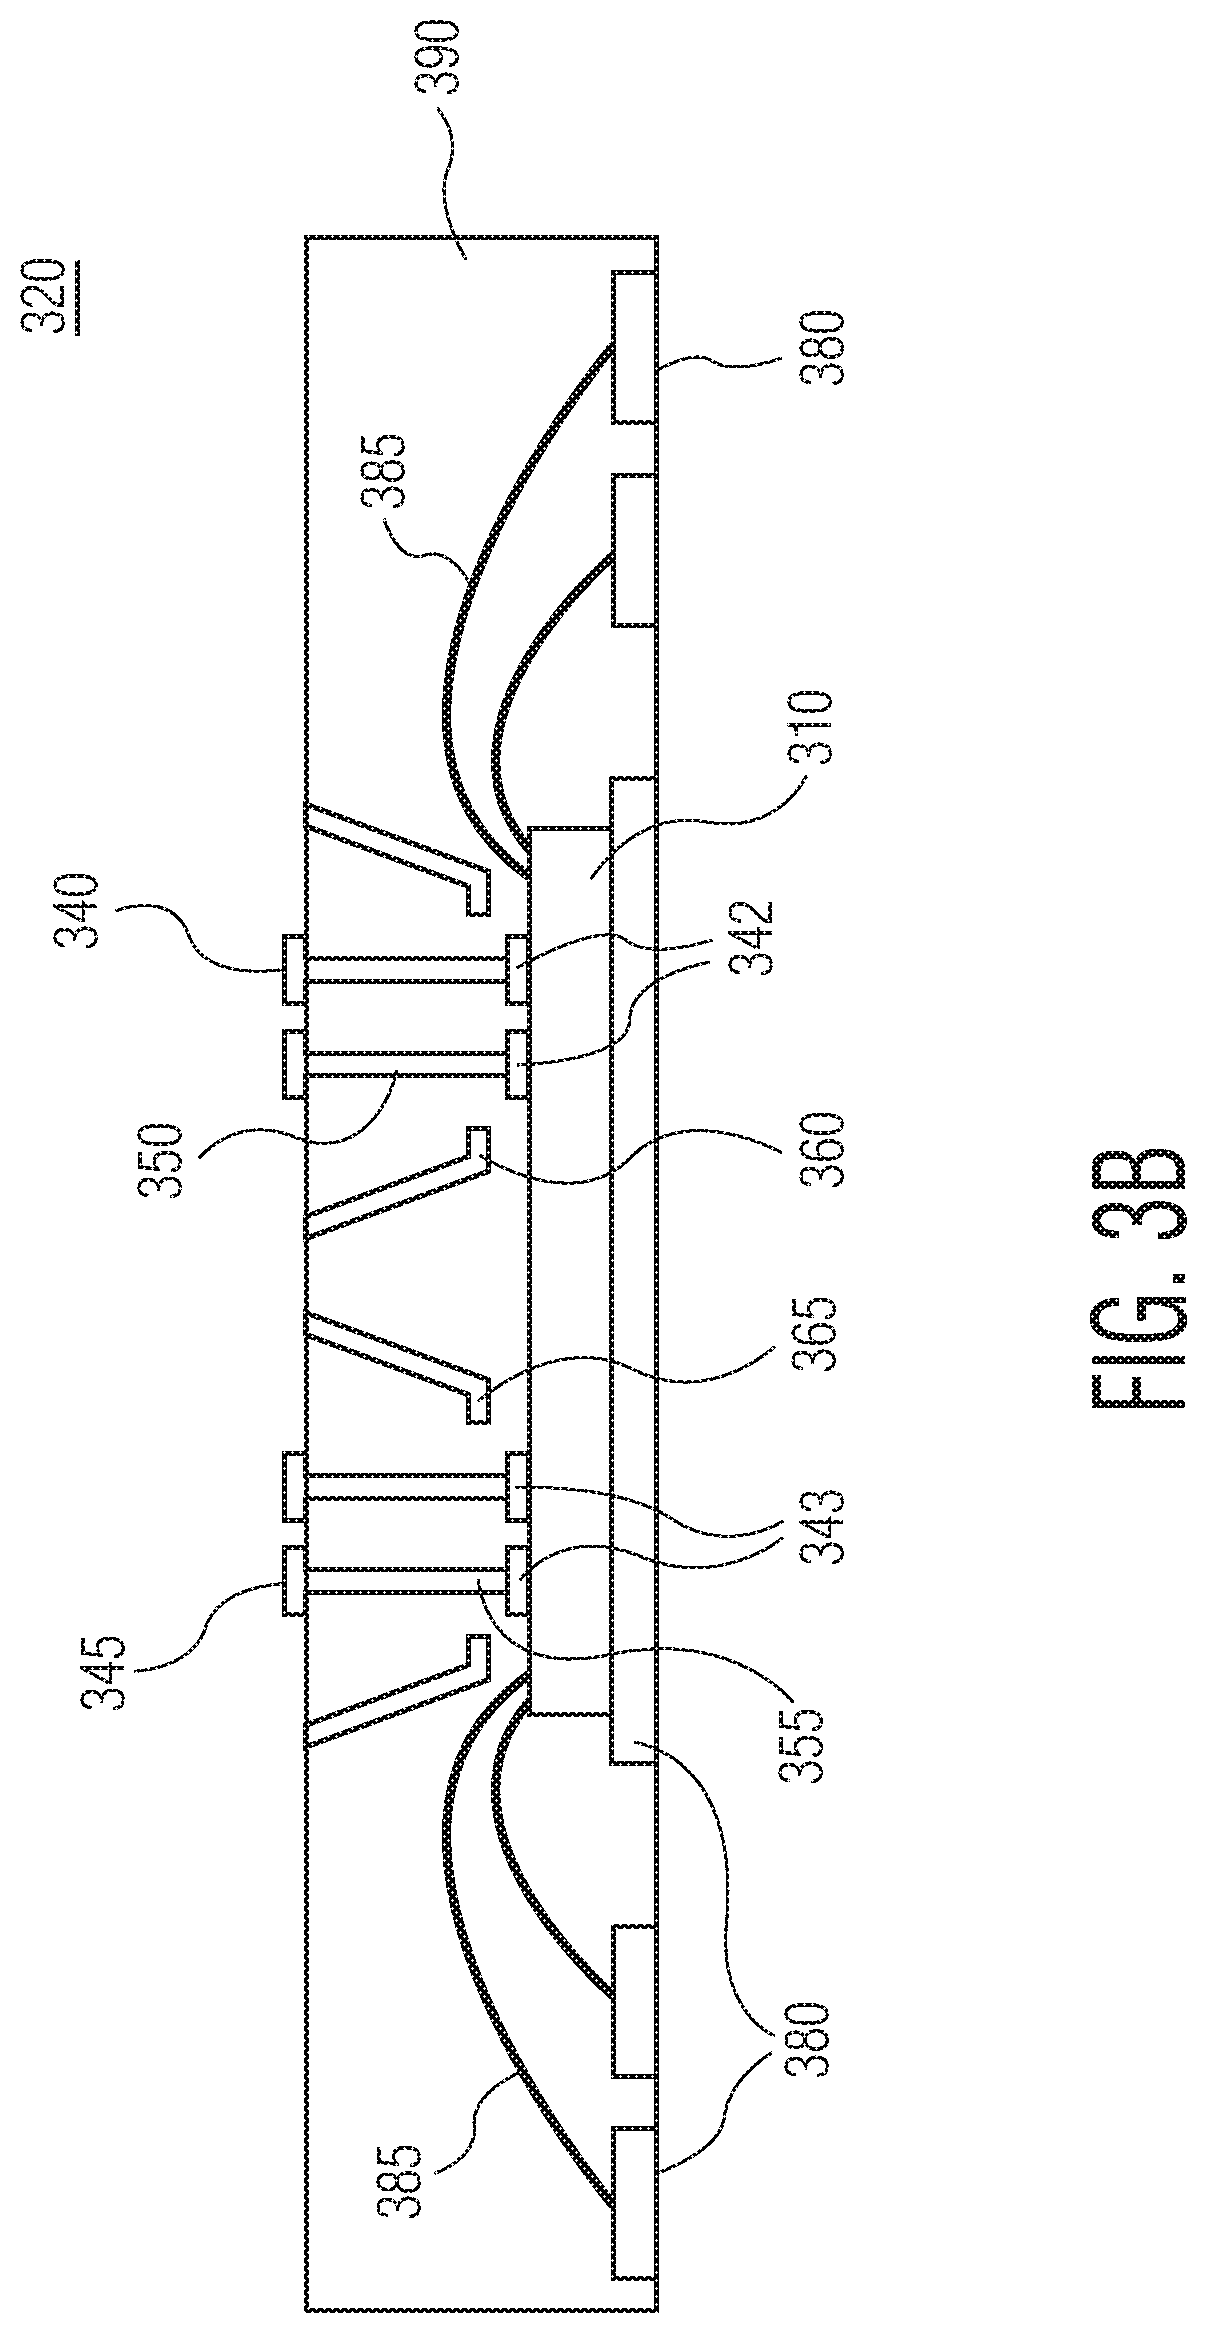 Method and Apparatus for Coupling a Waveguide Structure to an Integrated Circuit Package